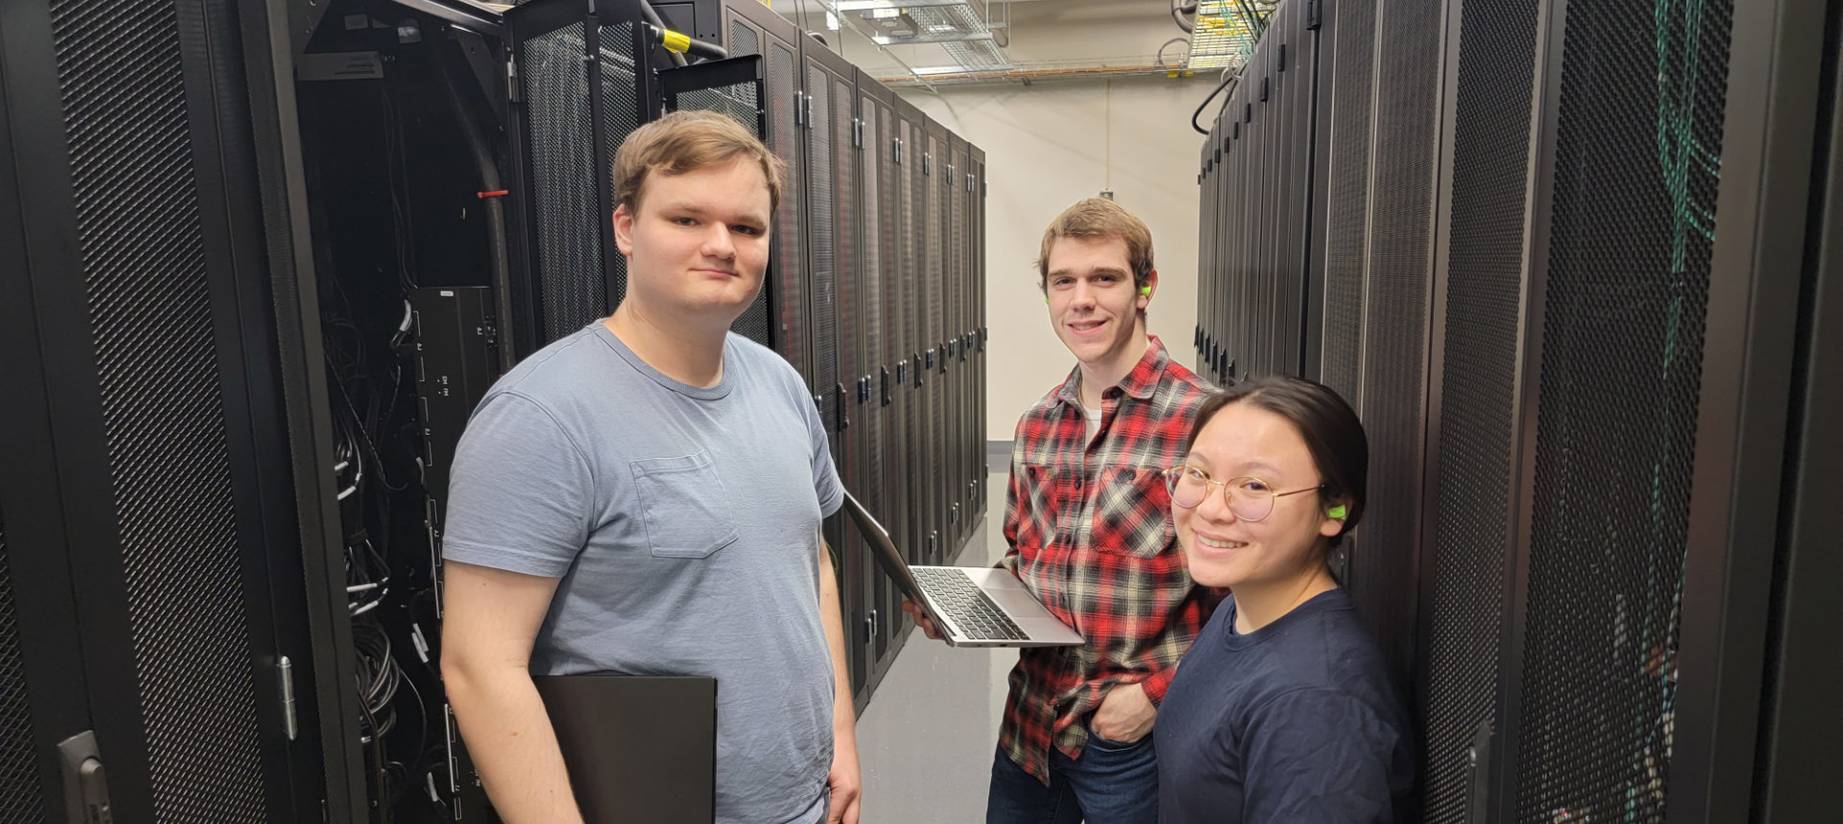 The HPC student admins located in the data center that houses the BOSE supercomputing cluster.